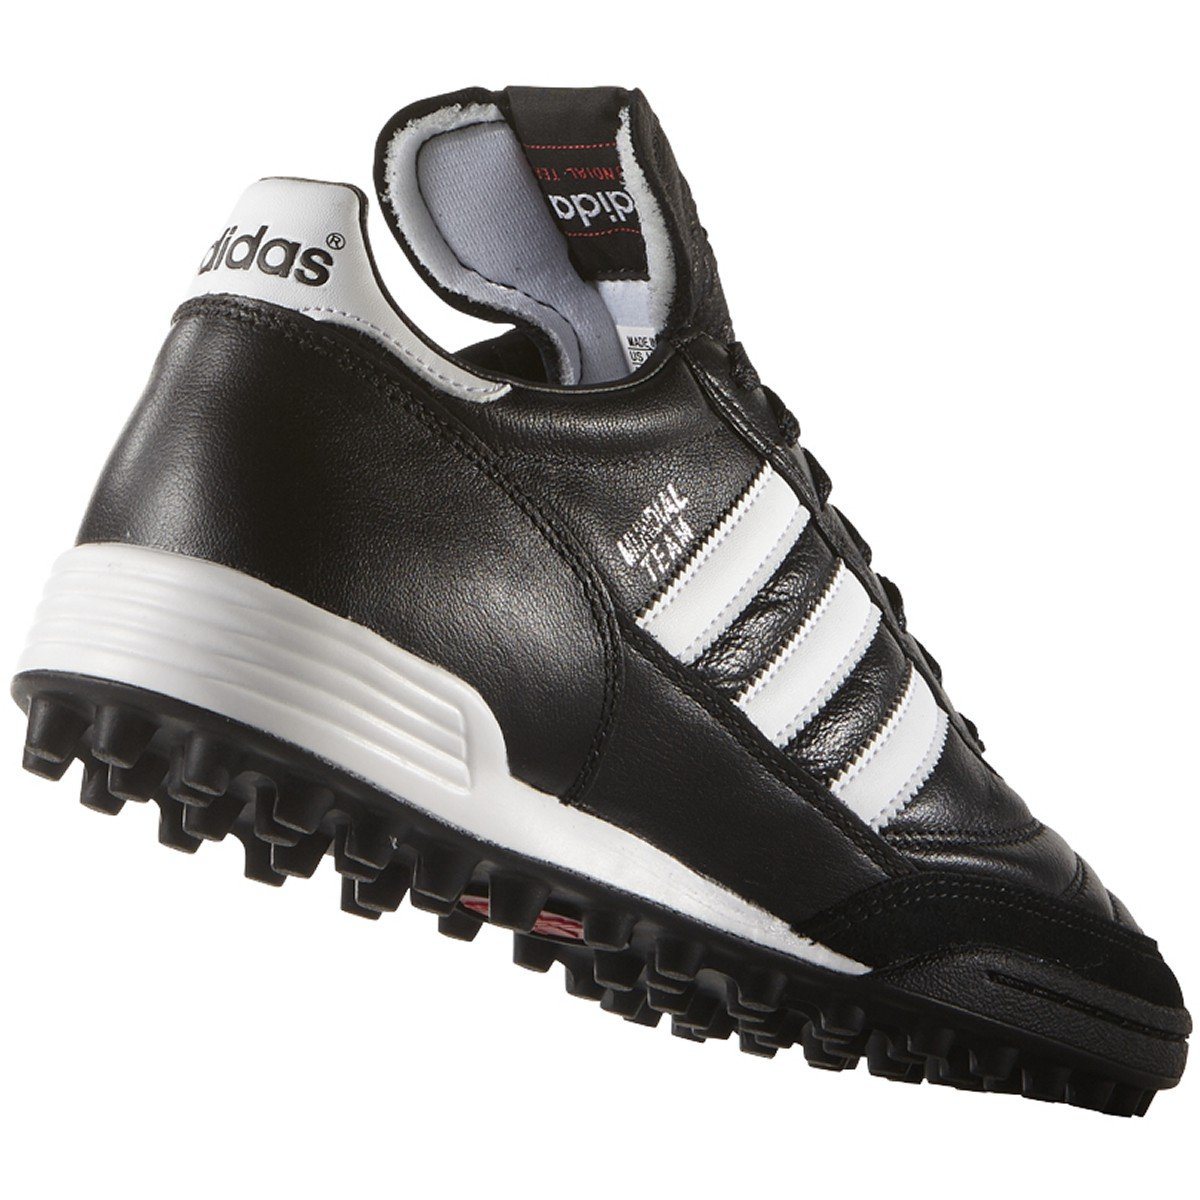 adidas Mundial Team Leather Soccer Turf Cleats | 019228 Turf Shoes Adidas 